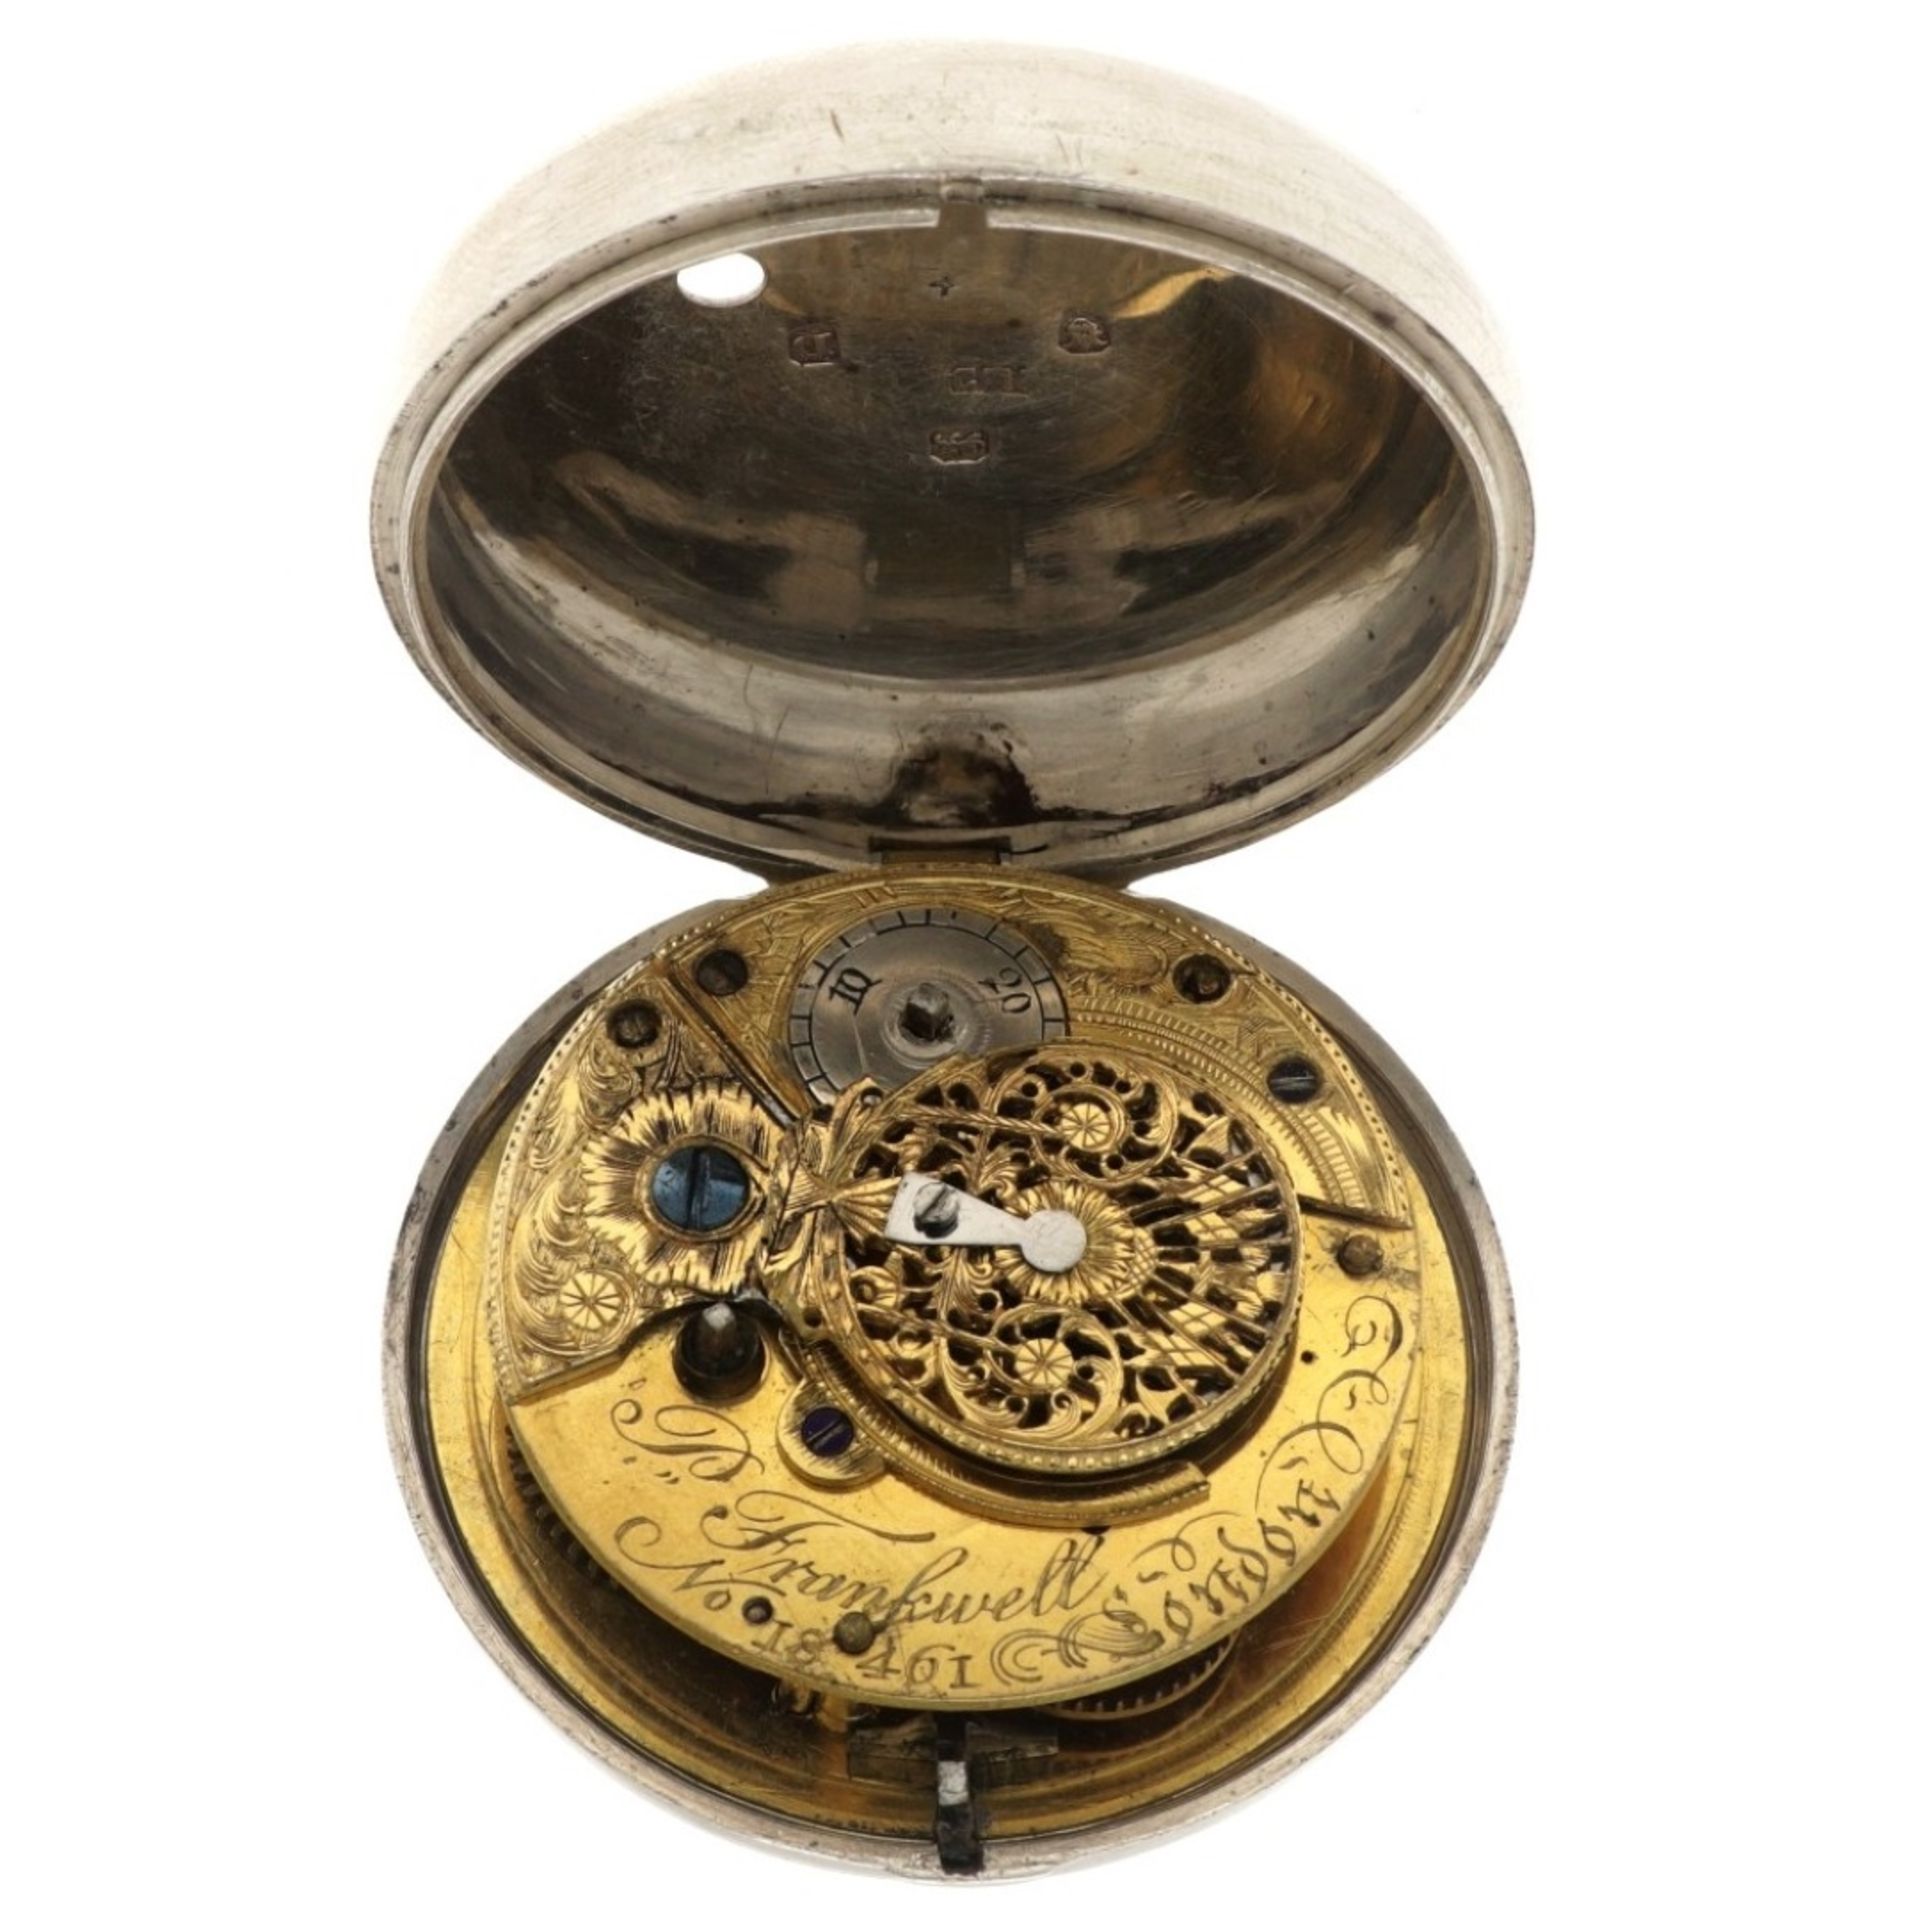 No Reserve - P. Frankwell Verge Fusee  Escapement Silver (925/1000) - Men's pocket watch - approx. 1 - Bild 5 aus 5